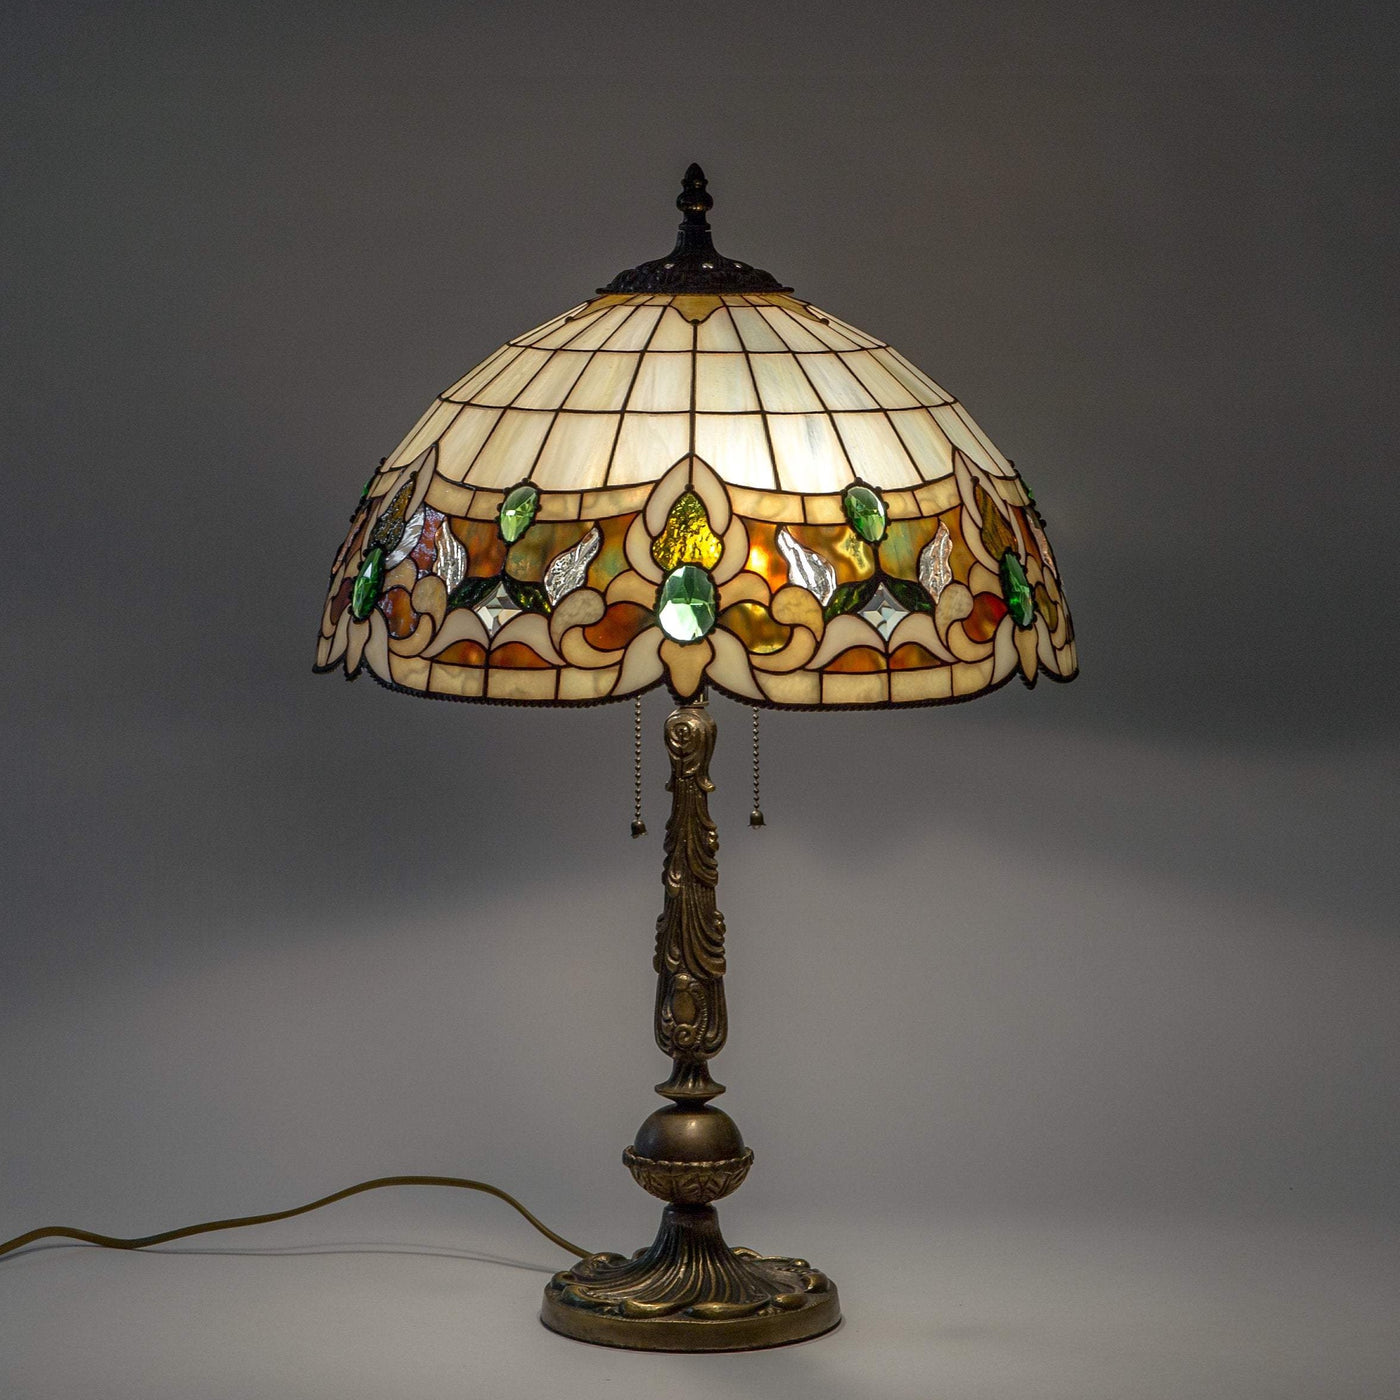 Lit stained glass Tiffany lamp in beige colour with green inserts